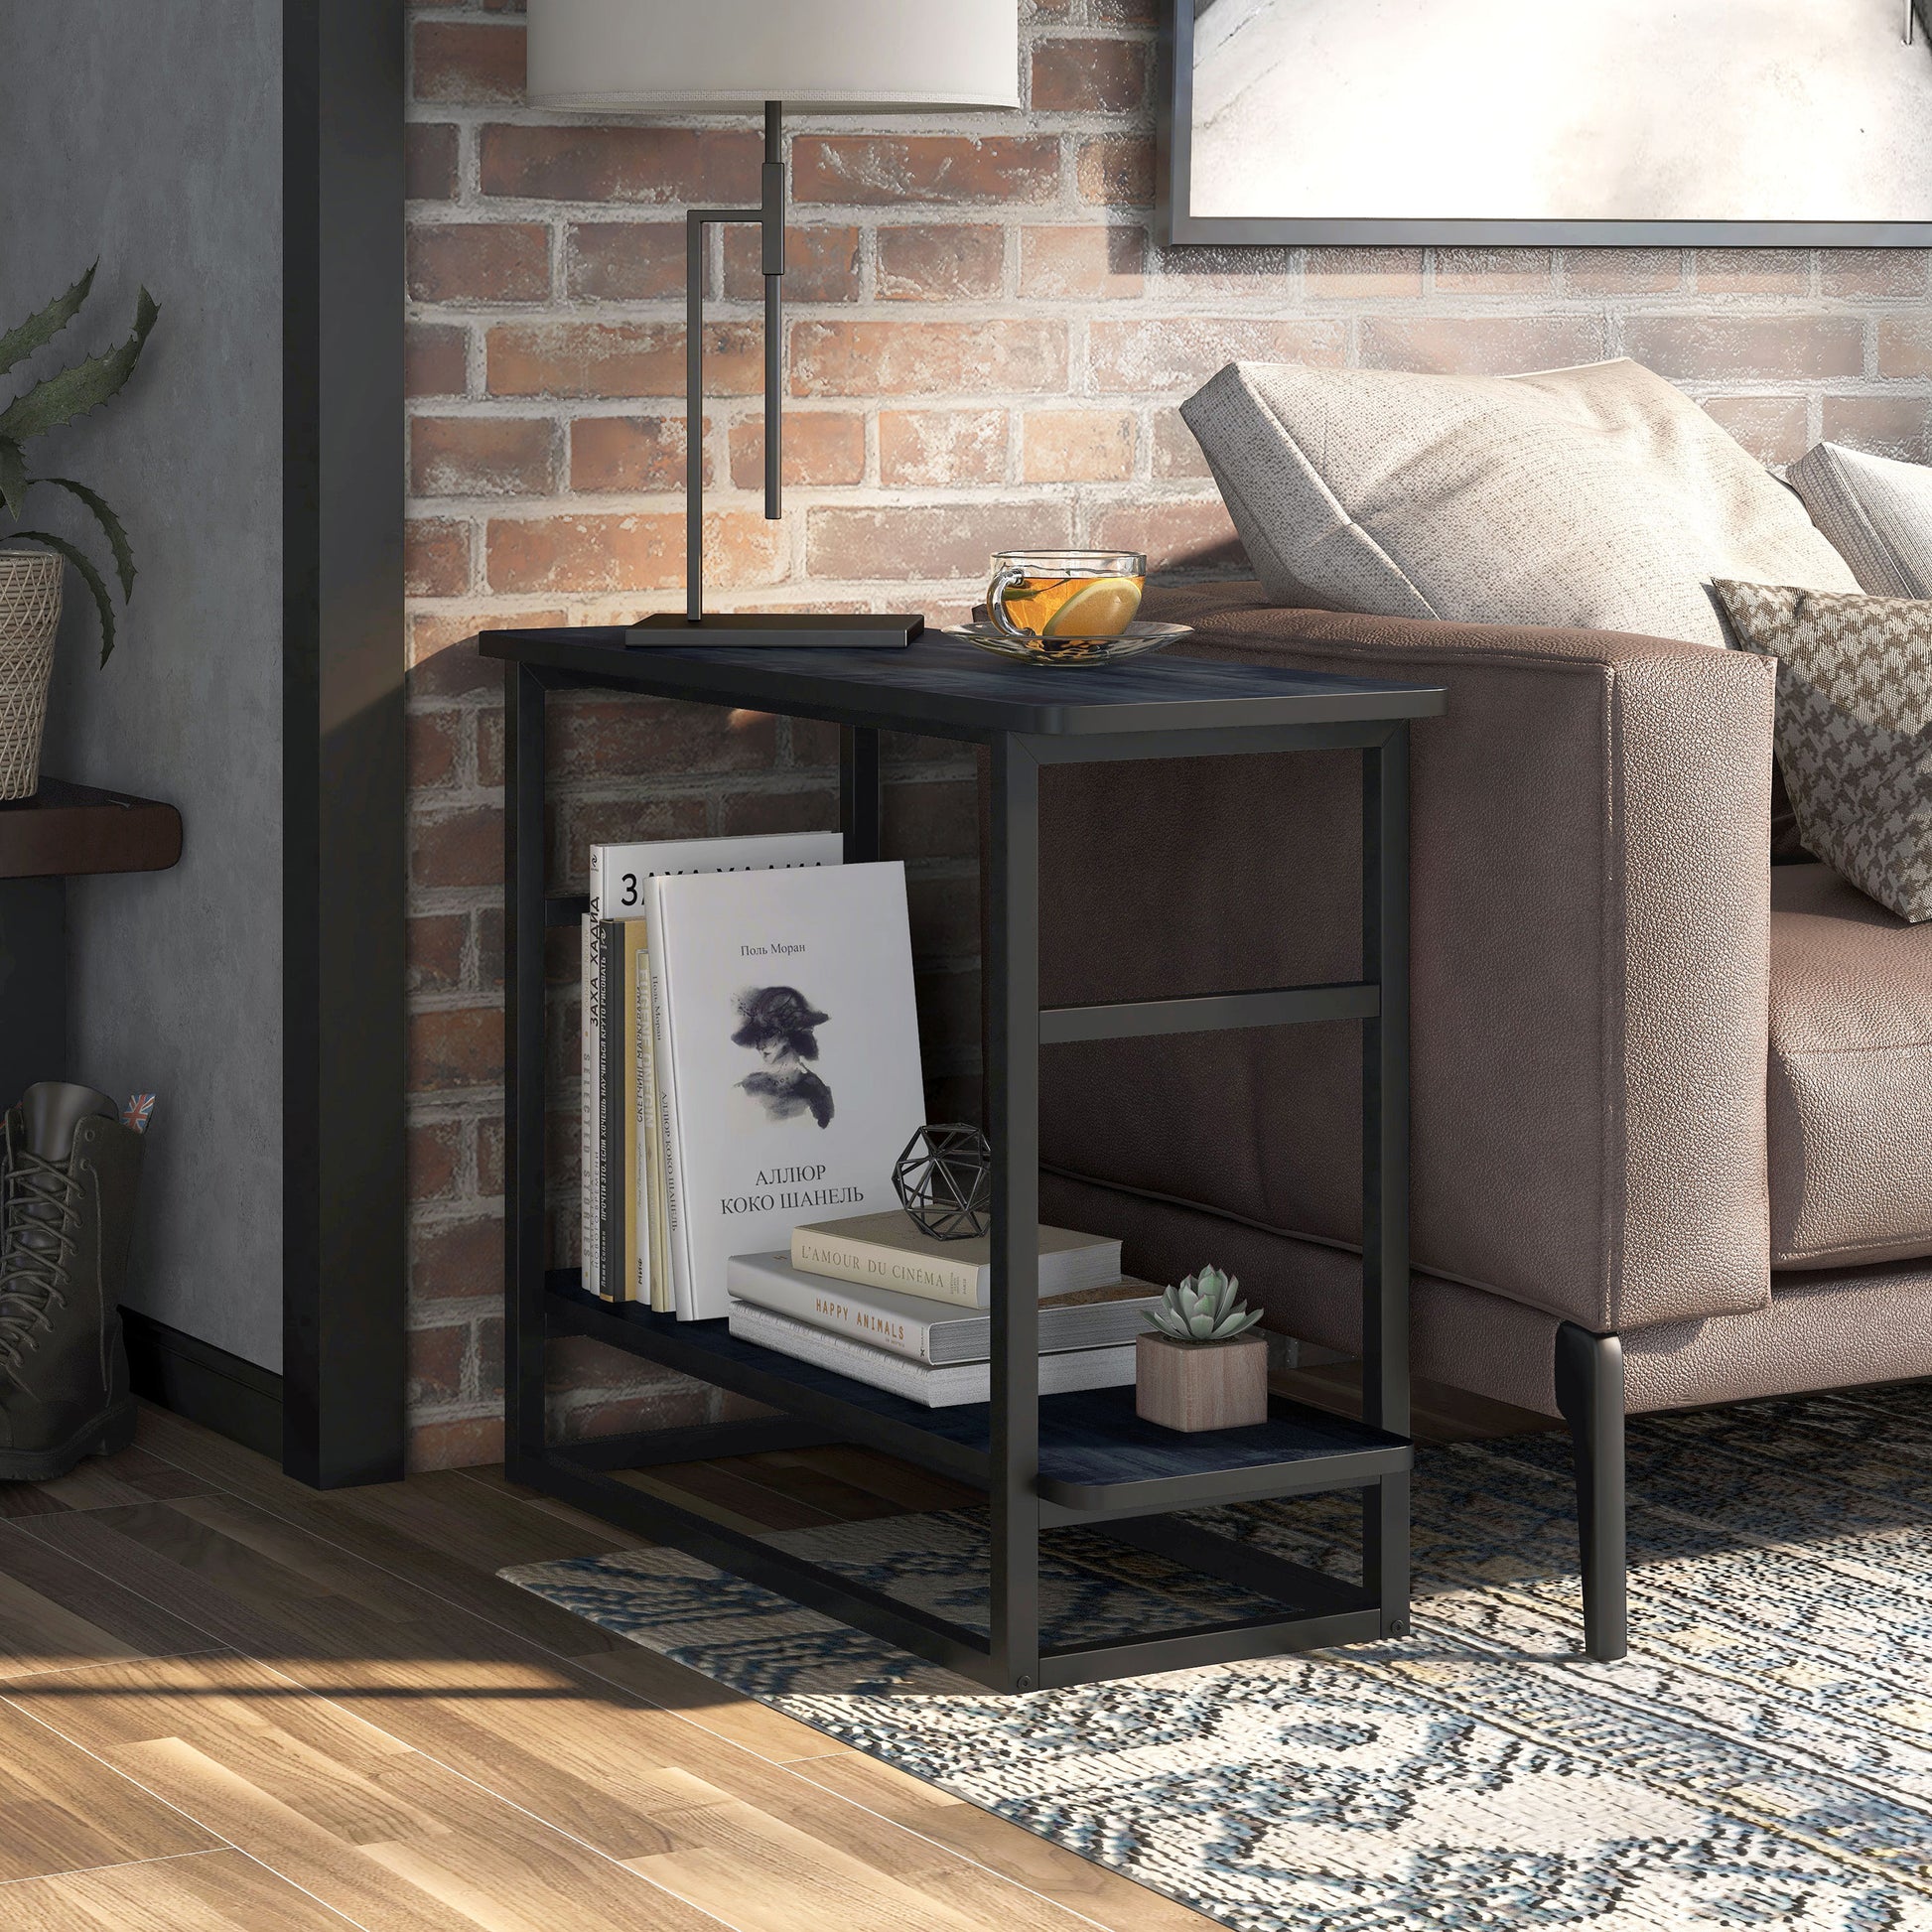 Right angled industrial rustic navy blue one-shelf long side table in a living room with accessories